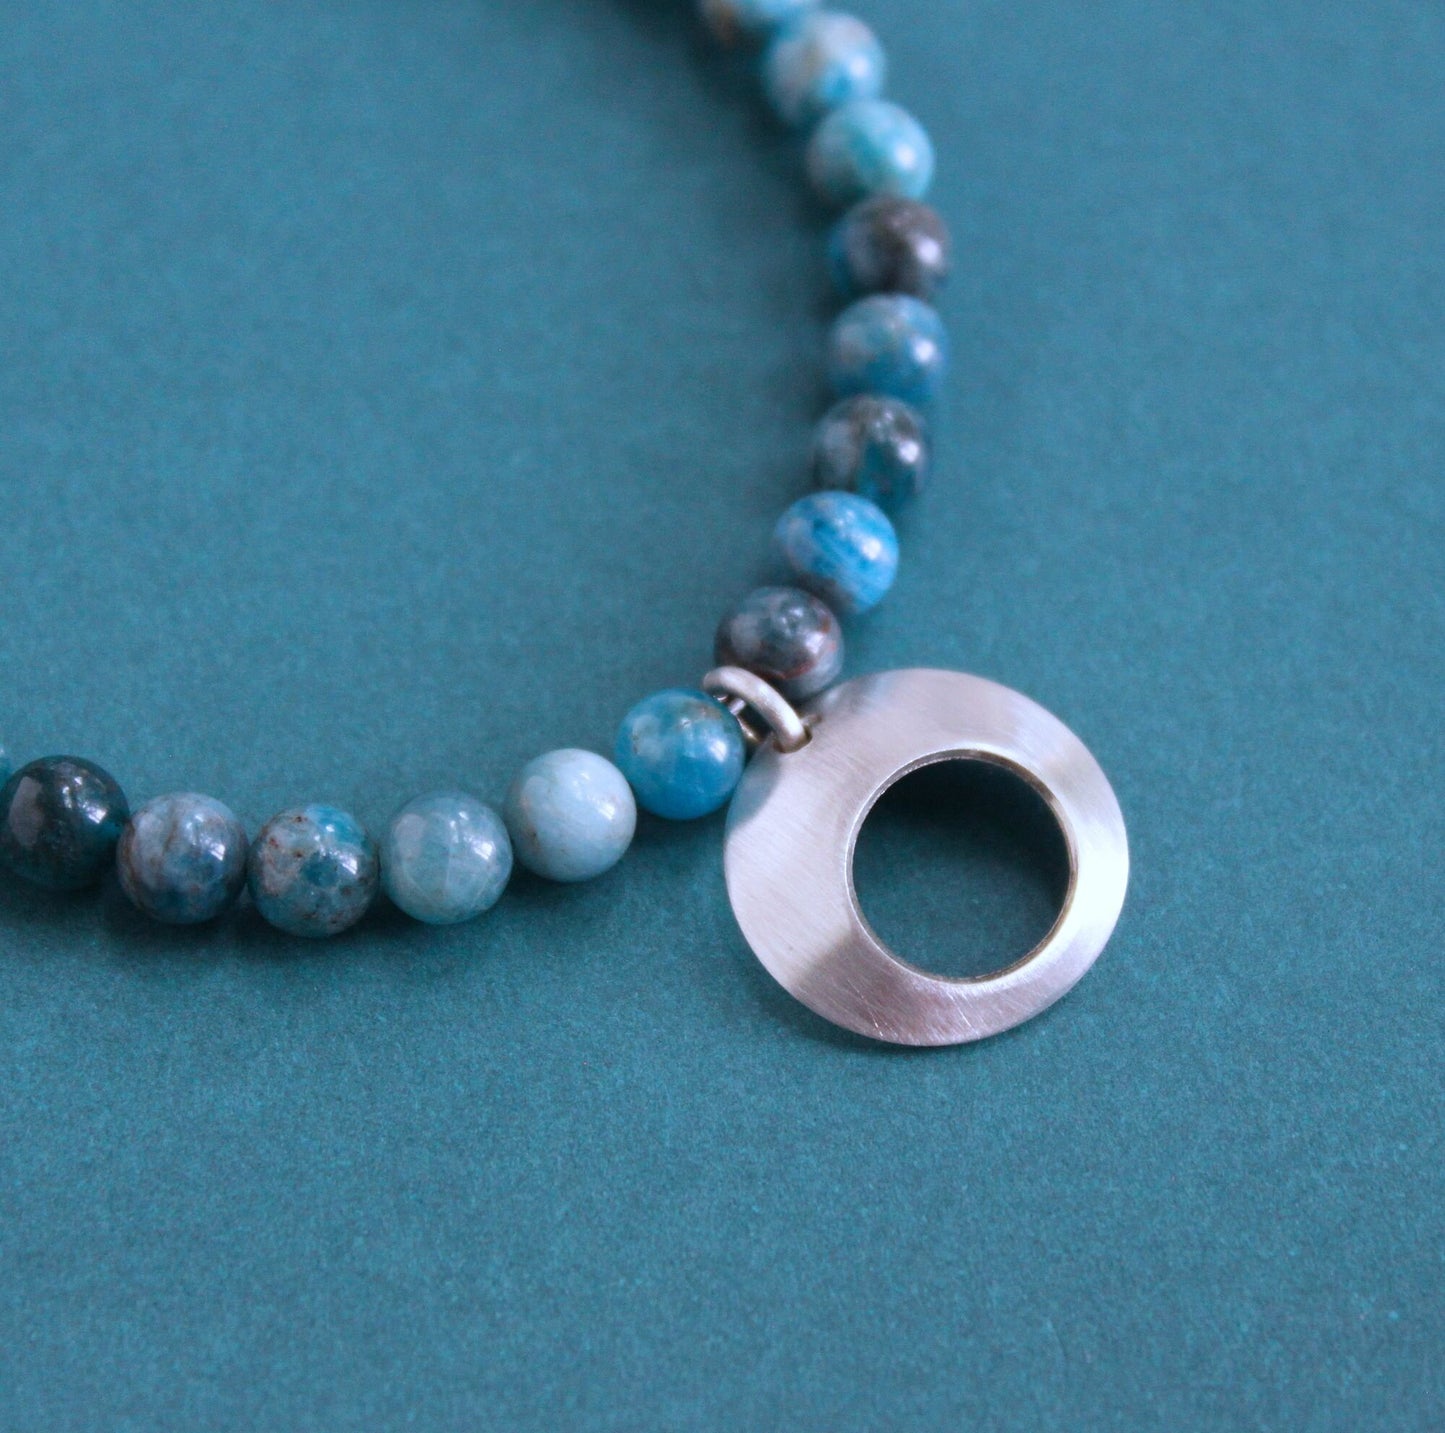 Blue Apatite Bead Necklace with Silver Pendant